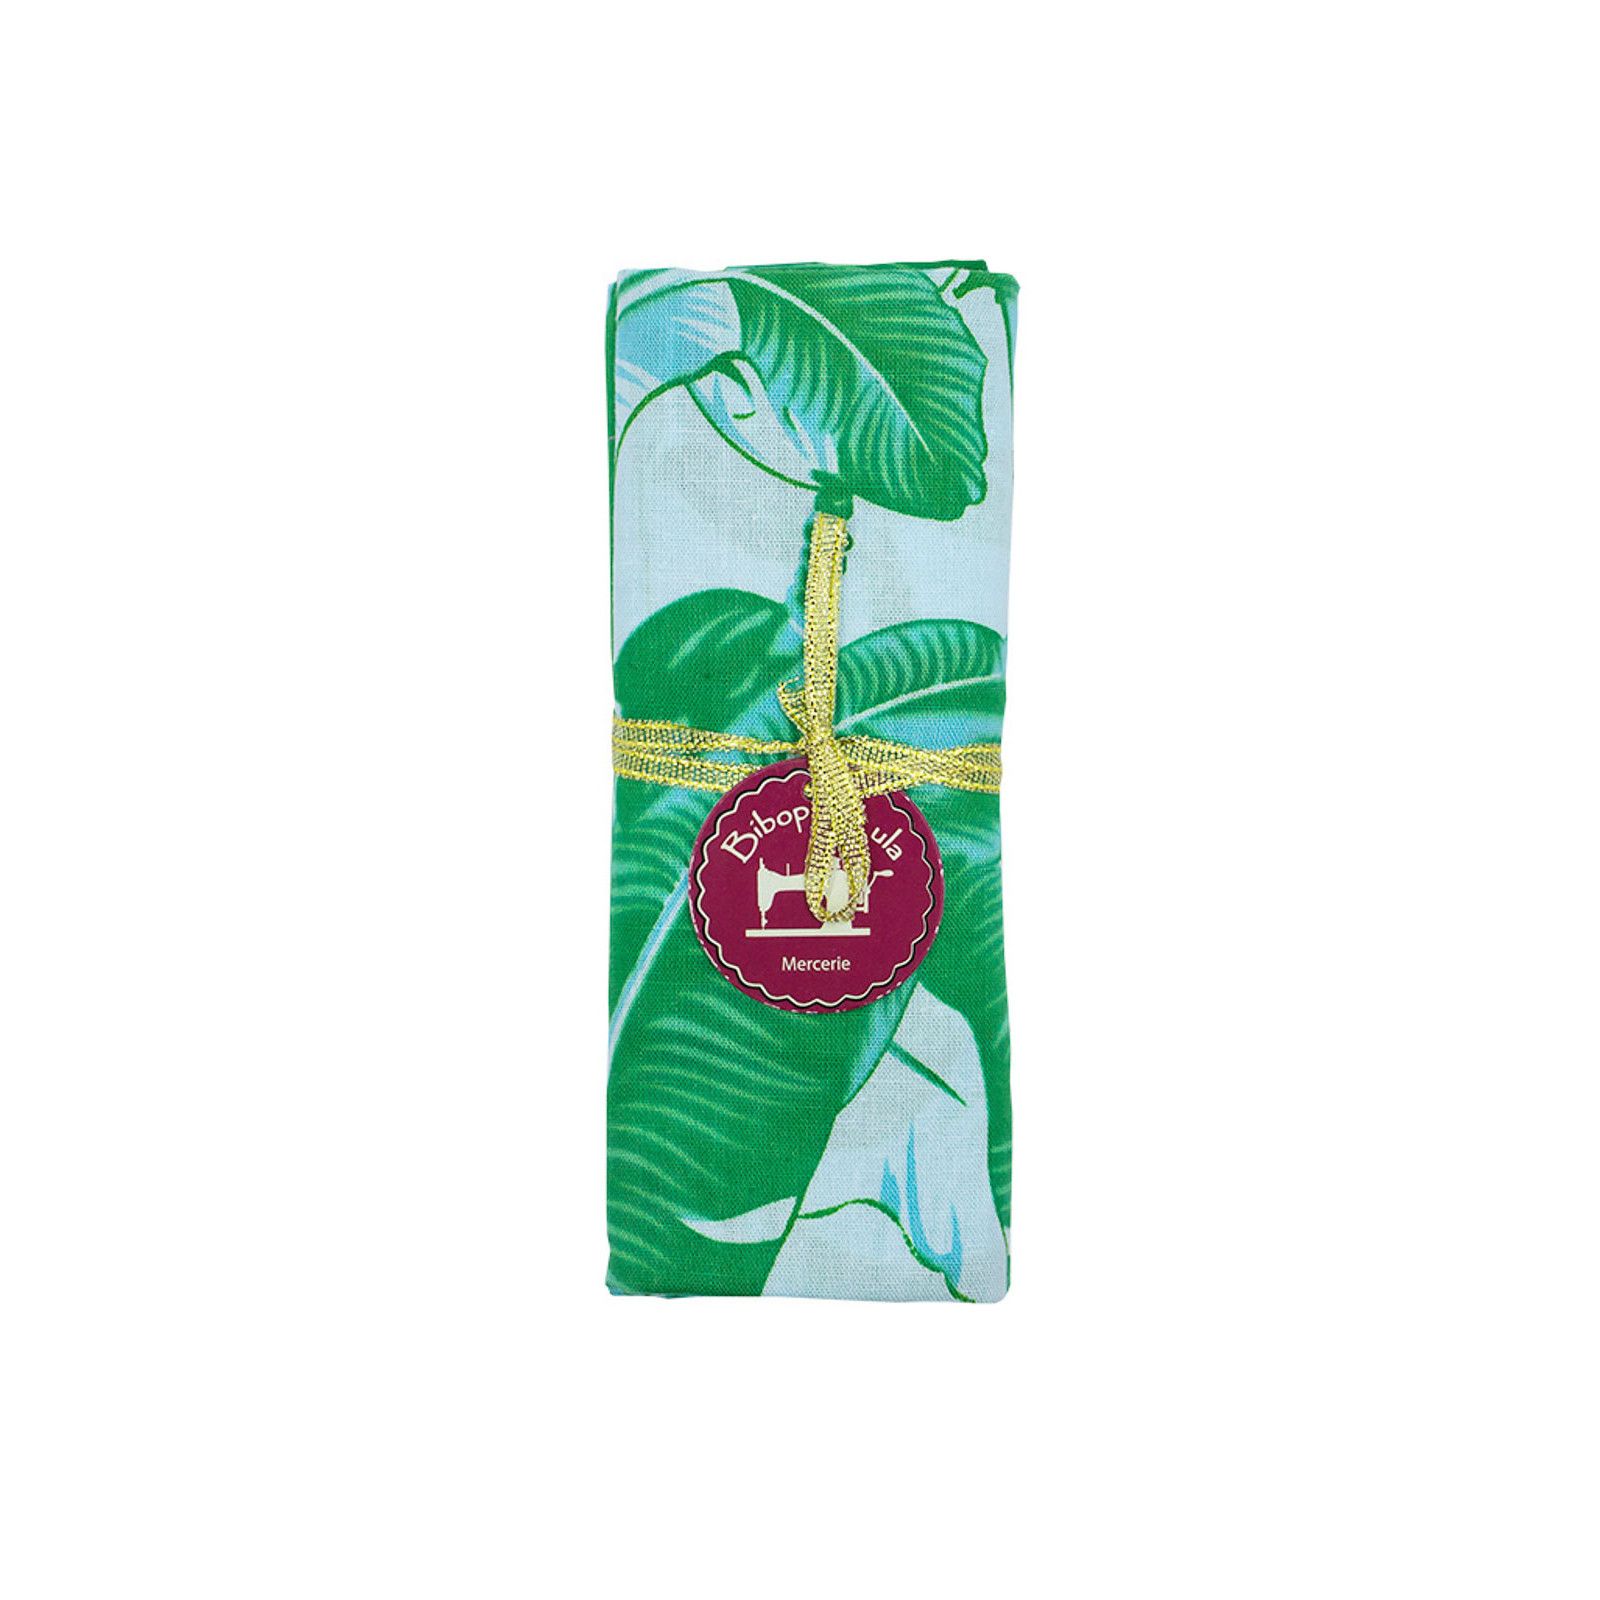 Coupon tissu Tropical forest